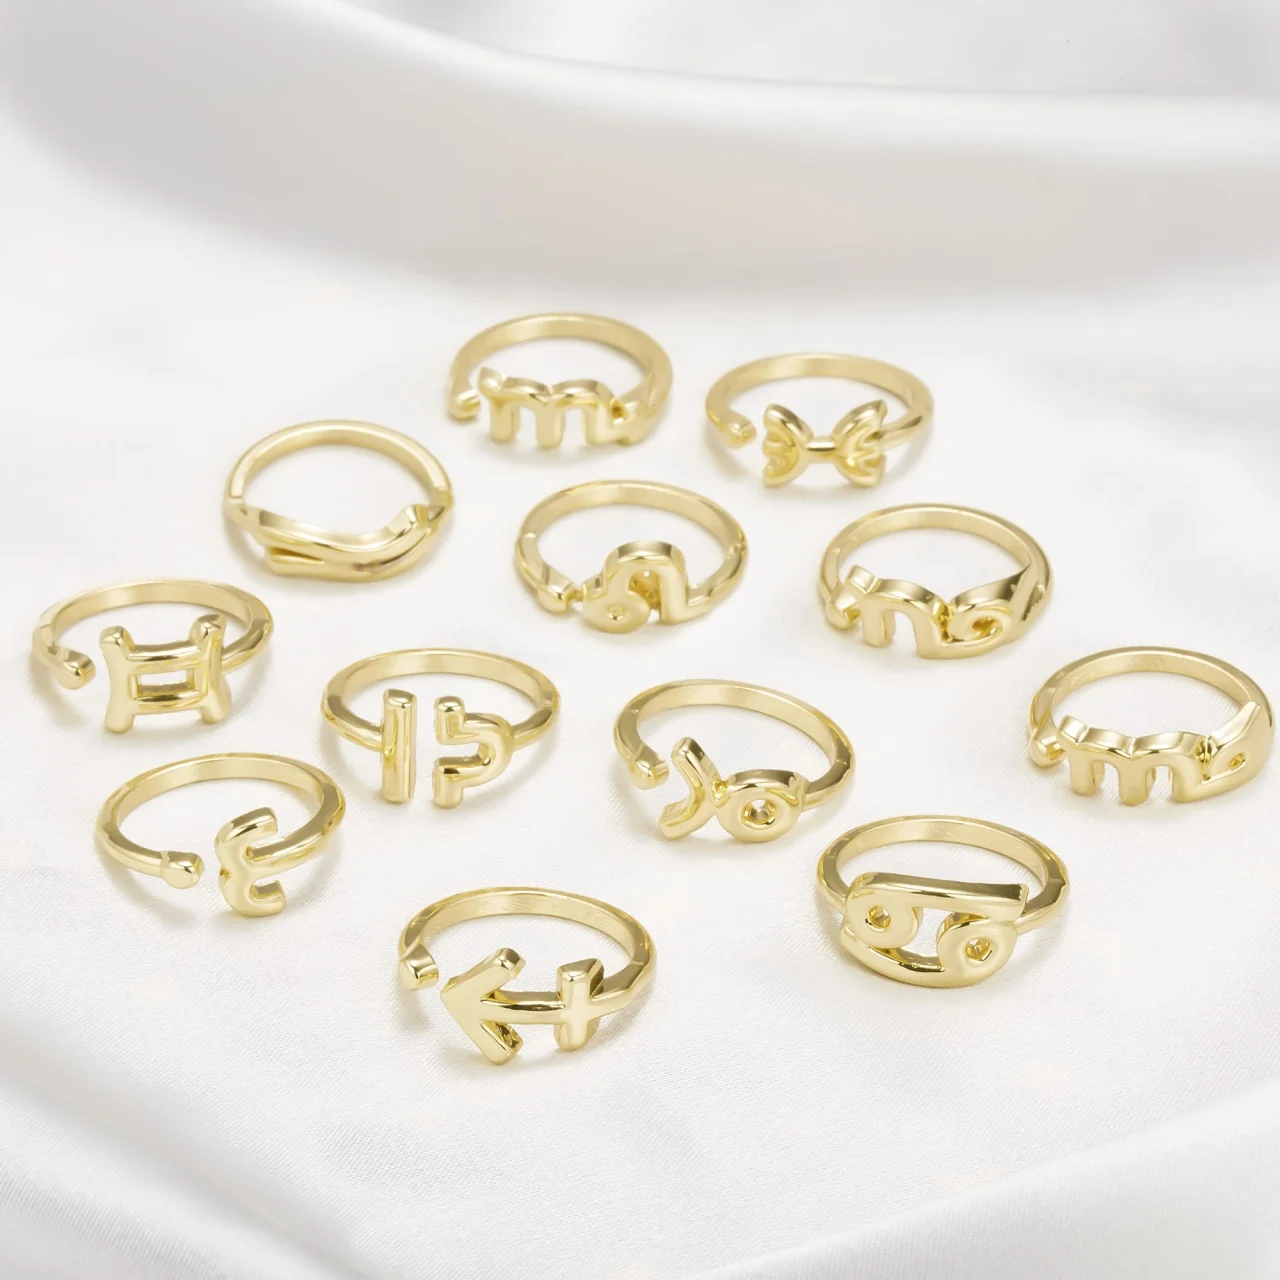 

Twelve Zodiac Open Ring Adjustable Gold Silver Color Rings for Girls Women Men Boys Couple Valentines's Day Gift Birthday